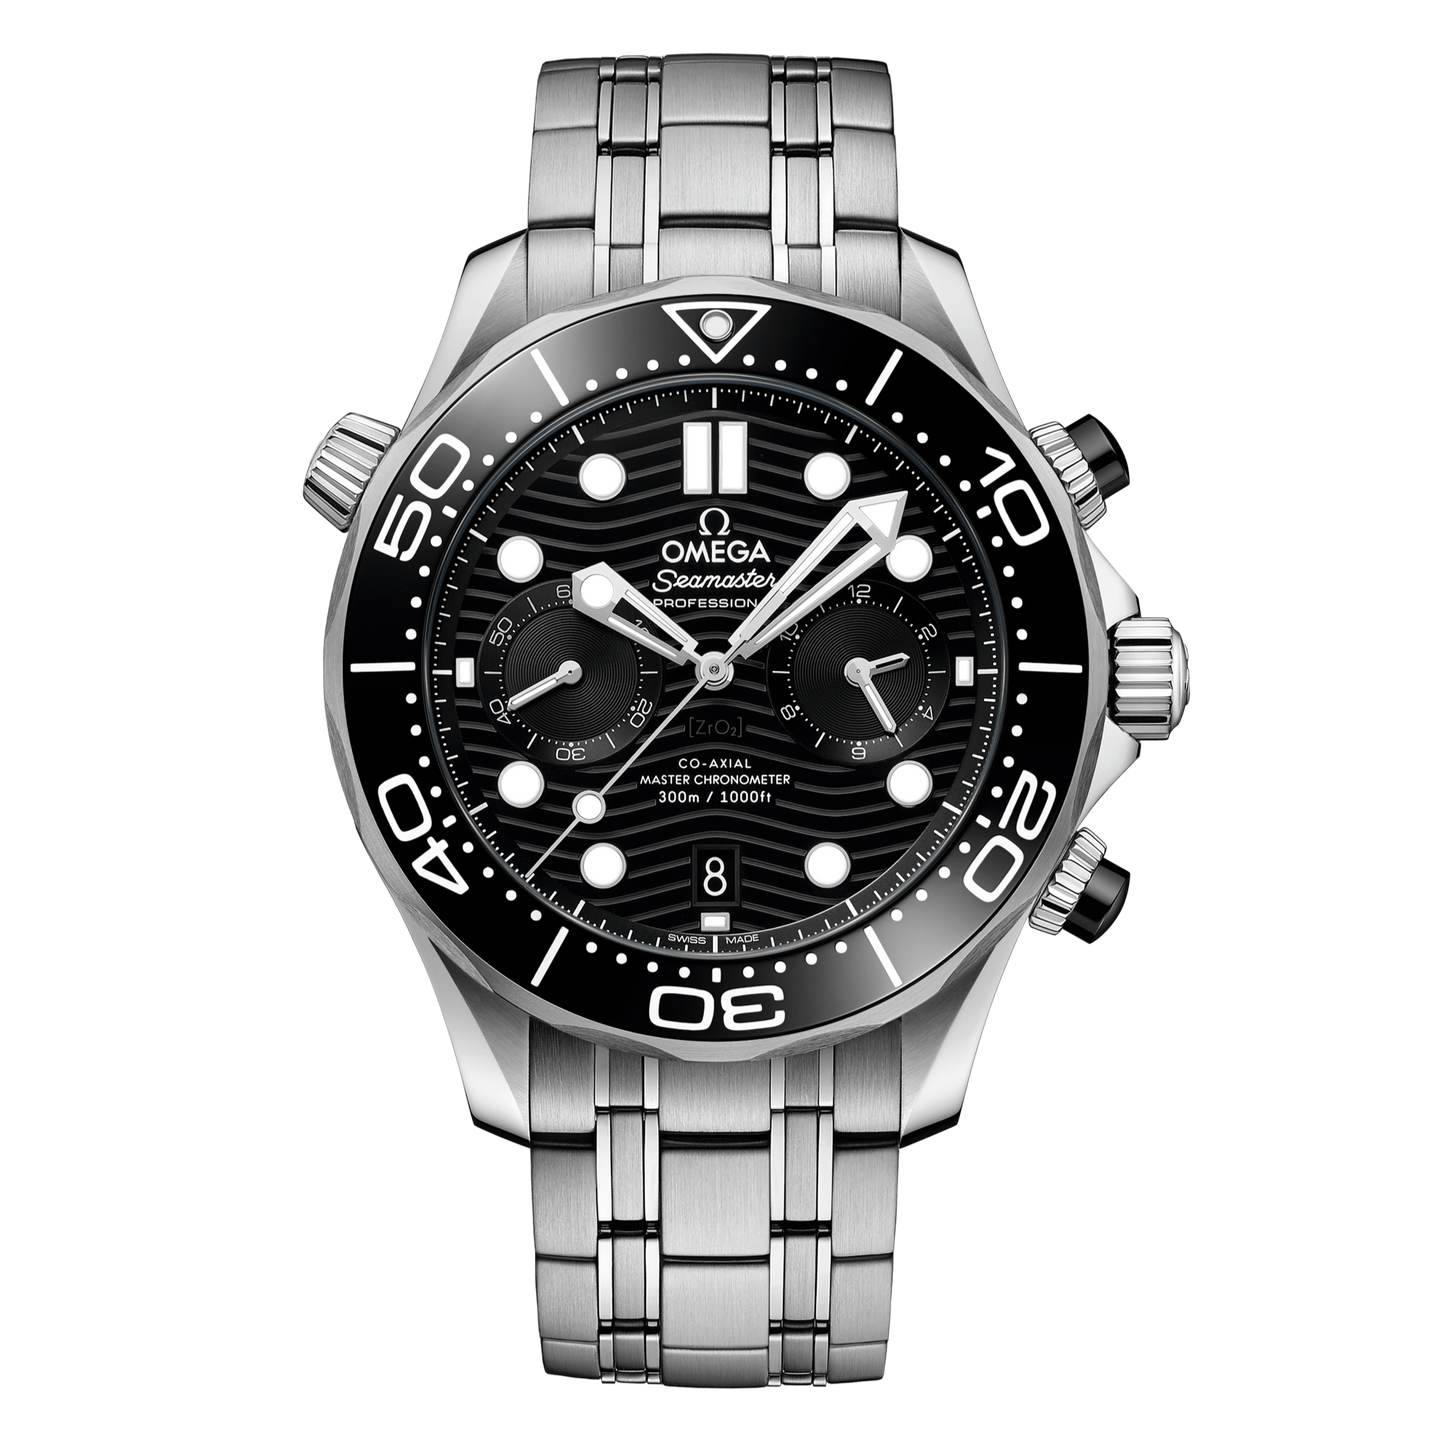 OMEGA Seamaster Diver 300m Co-Axial Master Chronometer Chronograph 44mm, Steel on steel